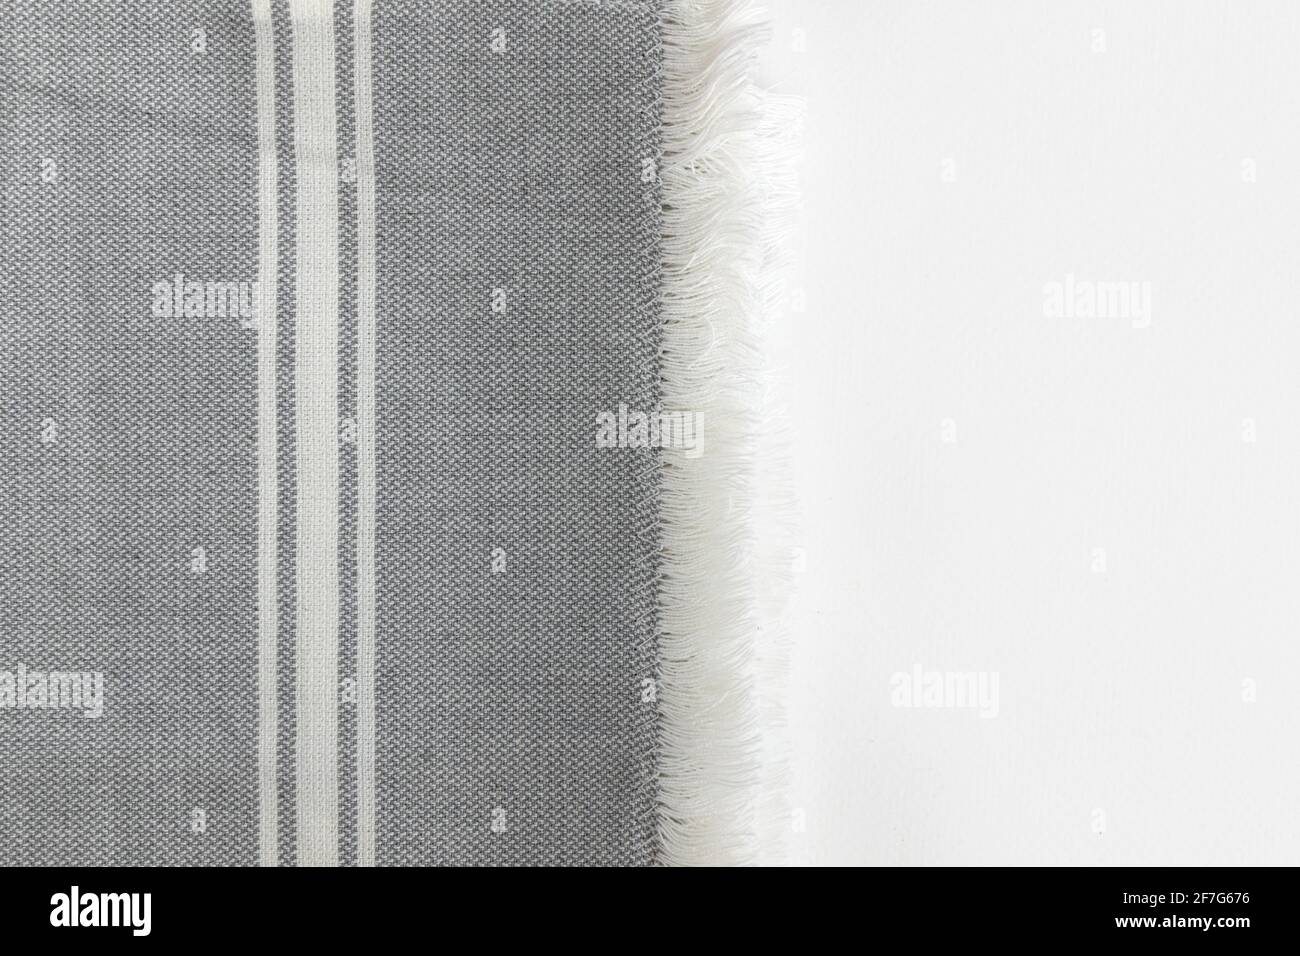 Folded grey cotton napkin isolated on white background with copy space. Top view Stock Photo